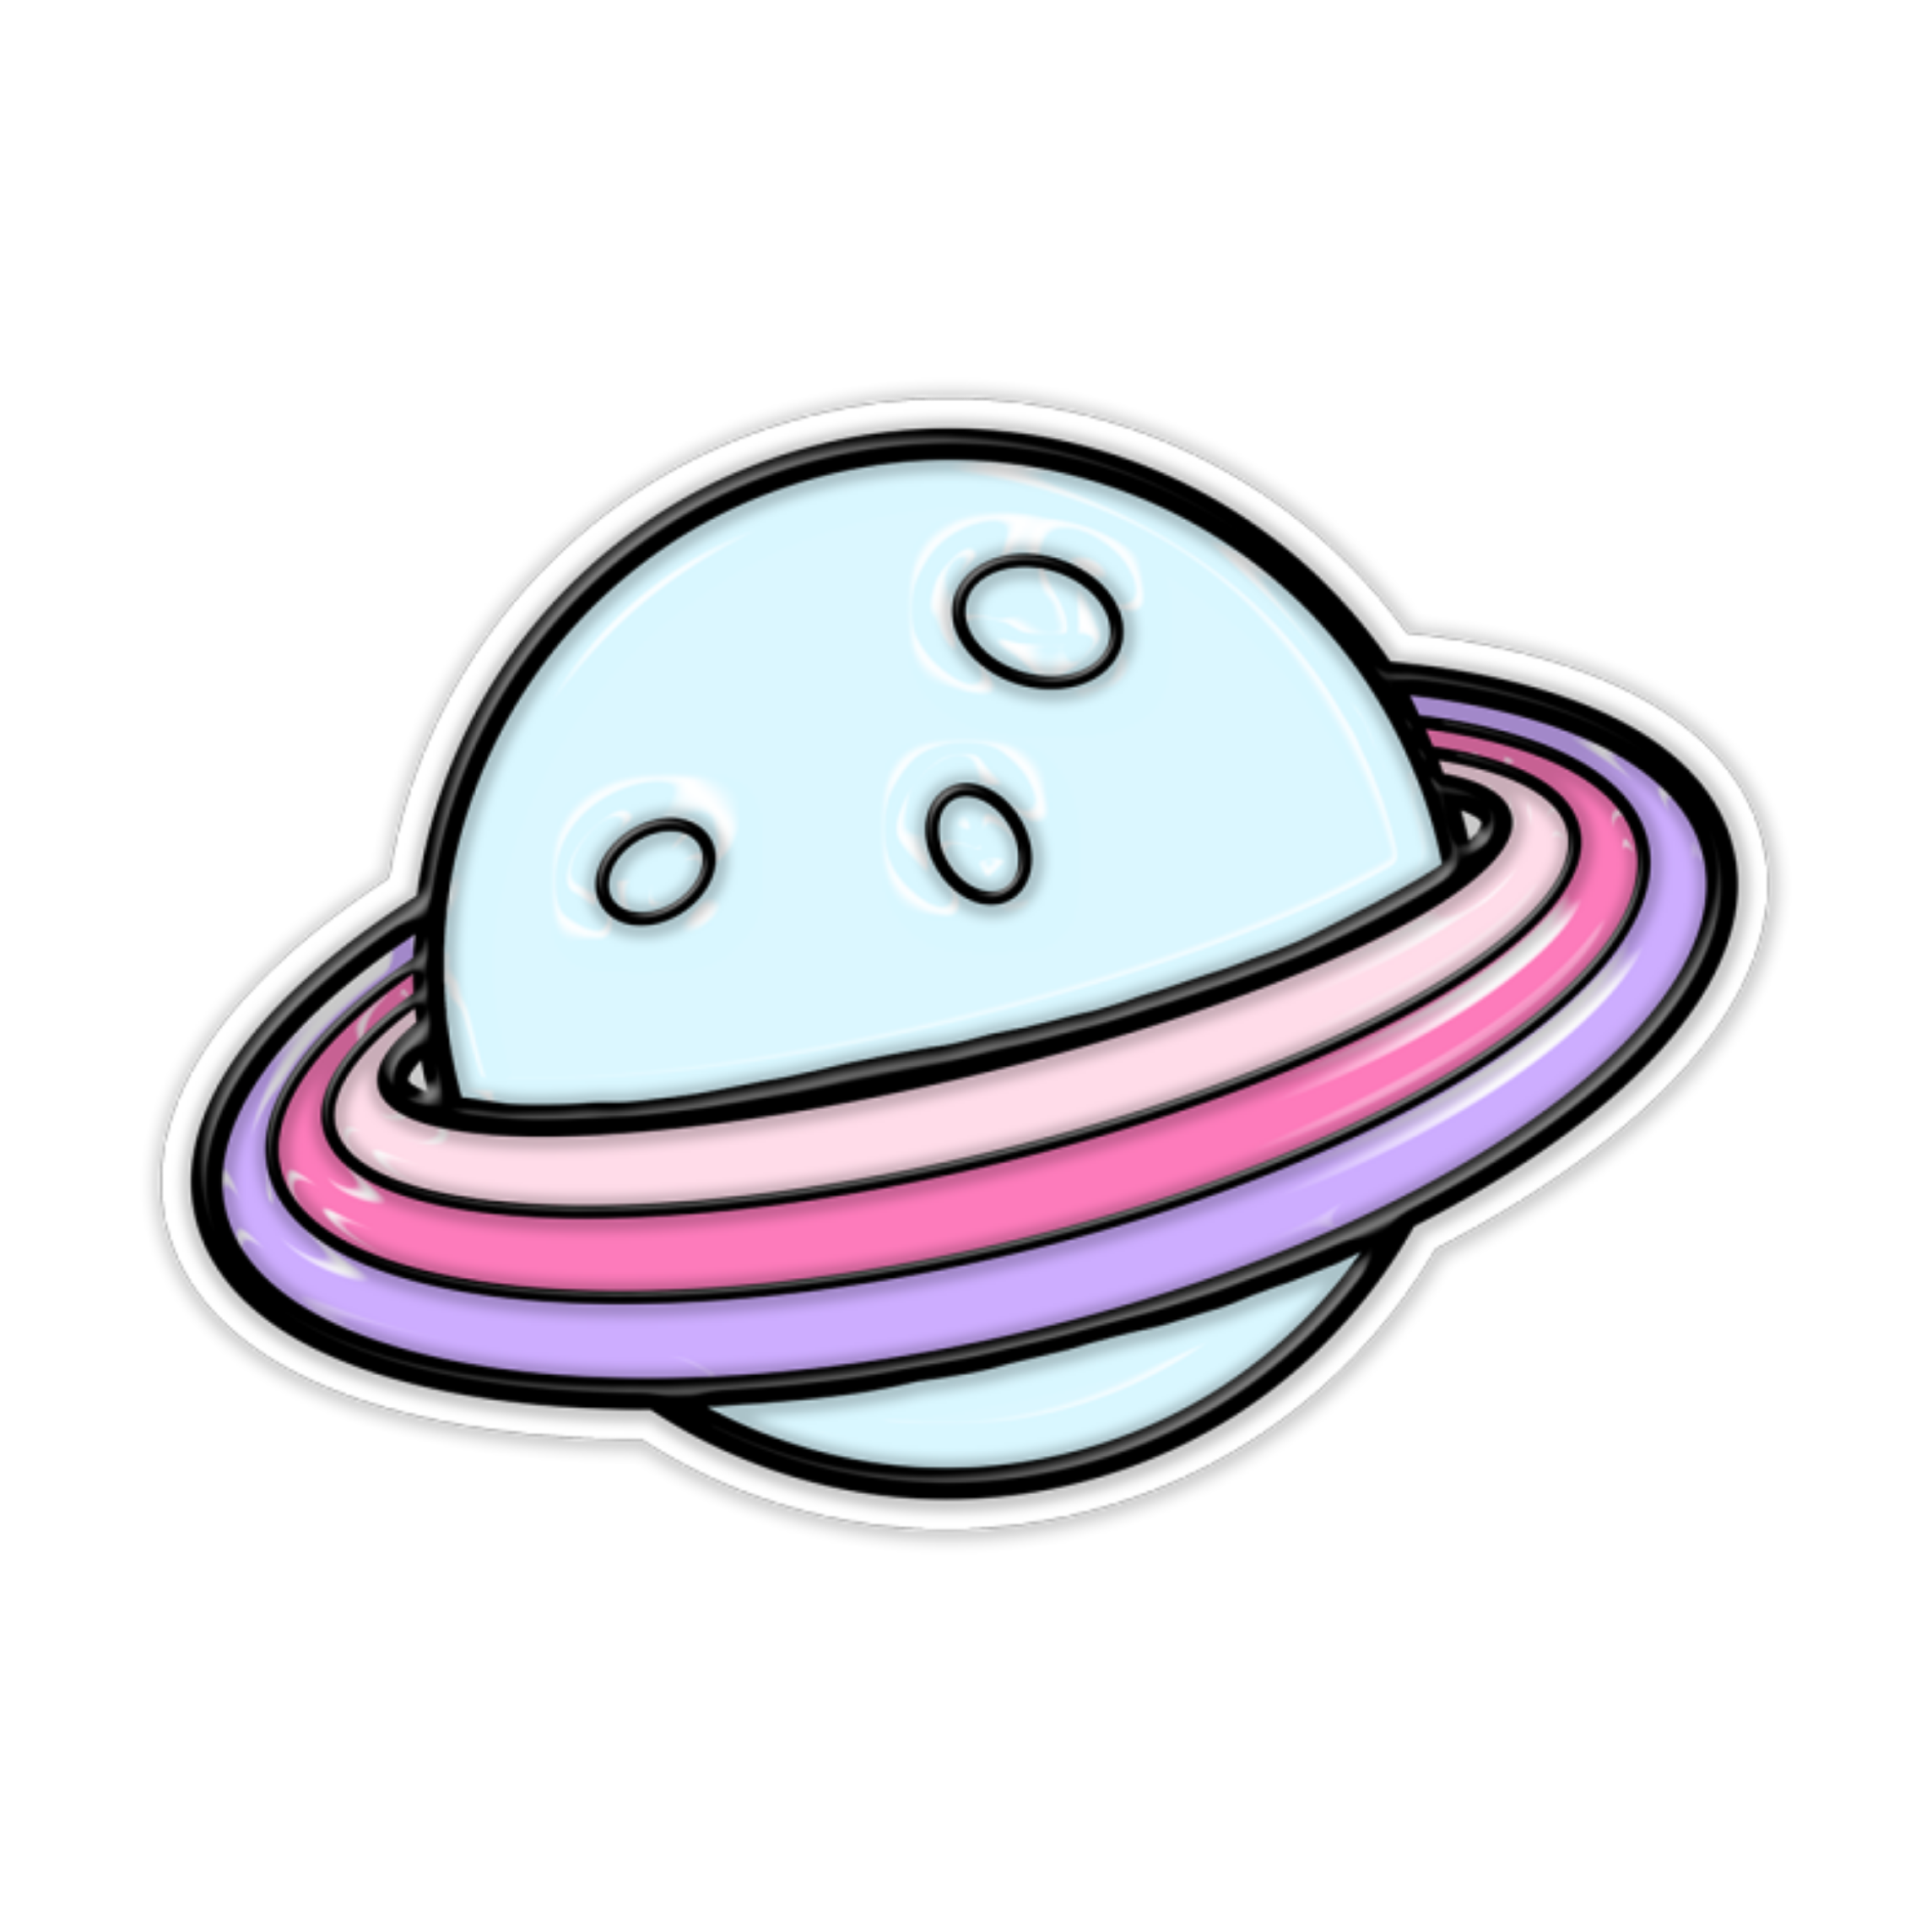 moon patch cute pastel tumblr aesthetic.